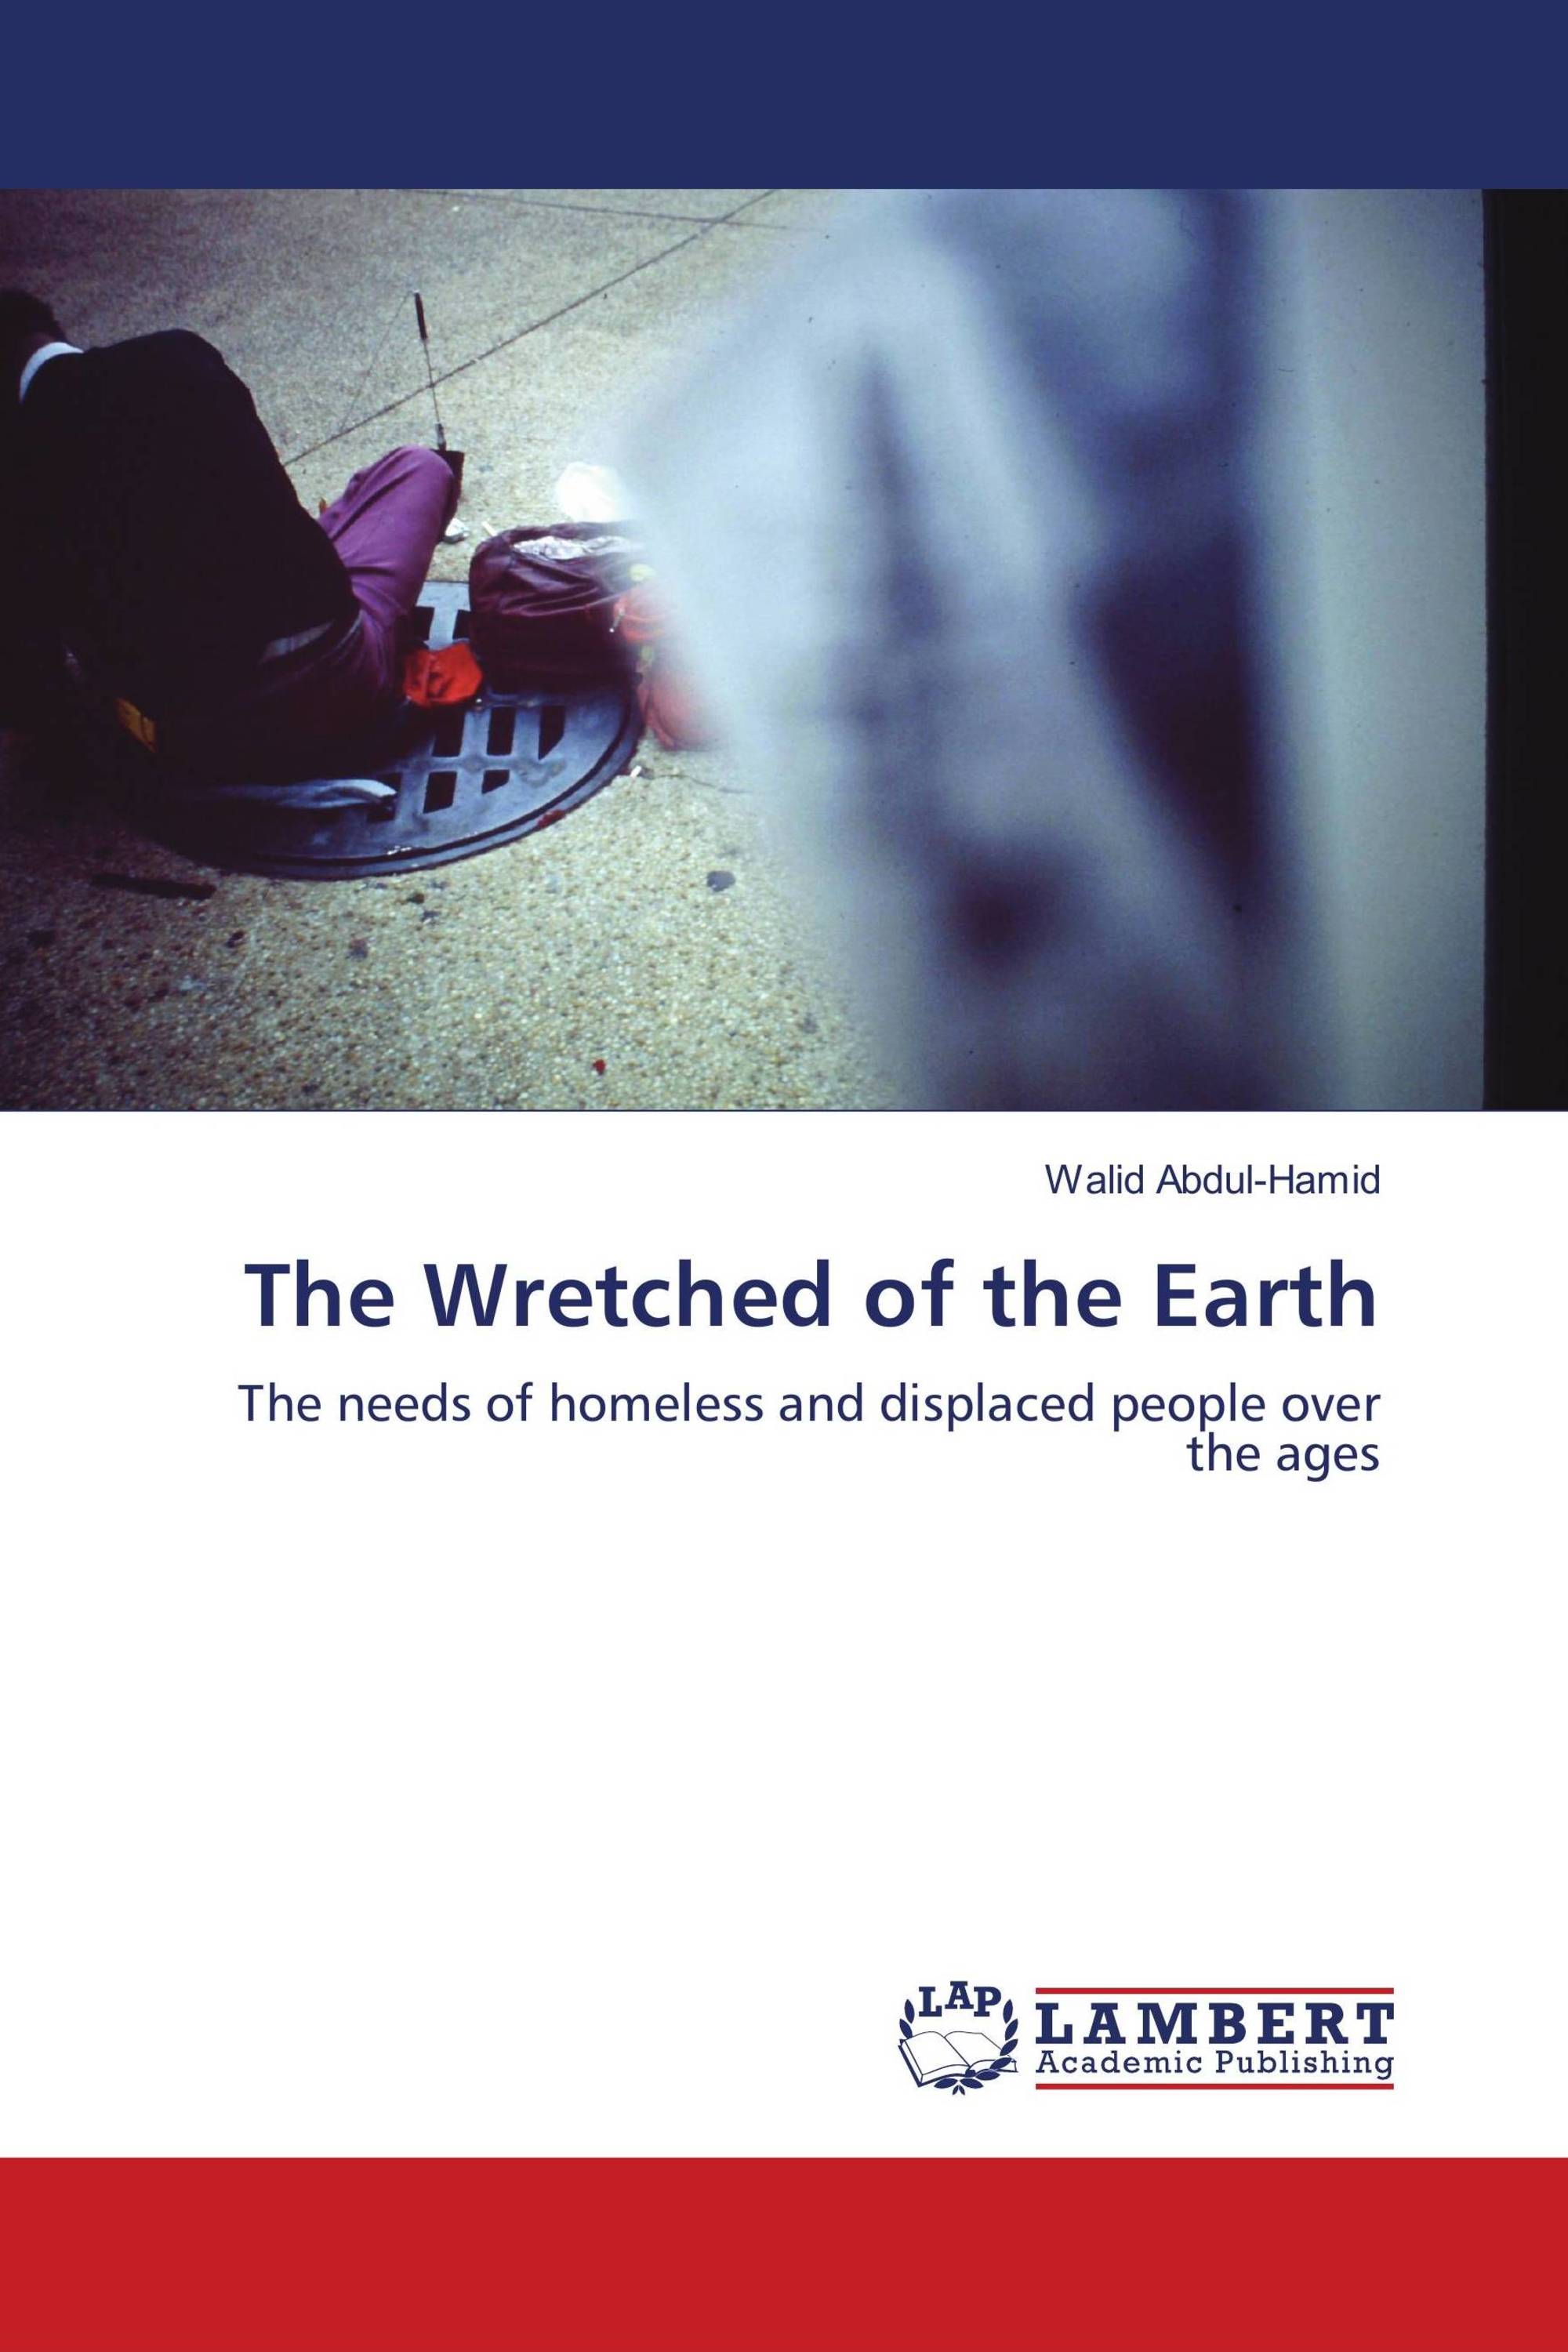 the wretched of the earth on violence